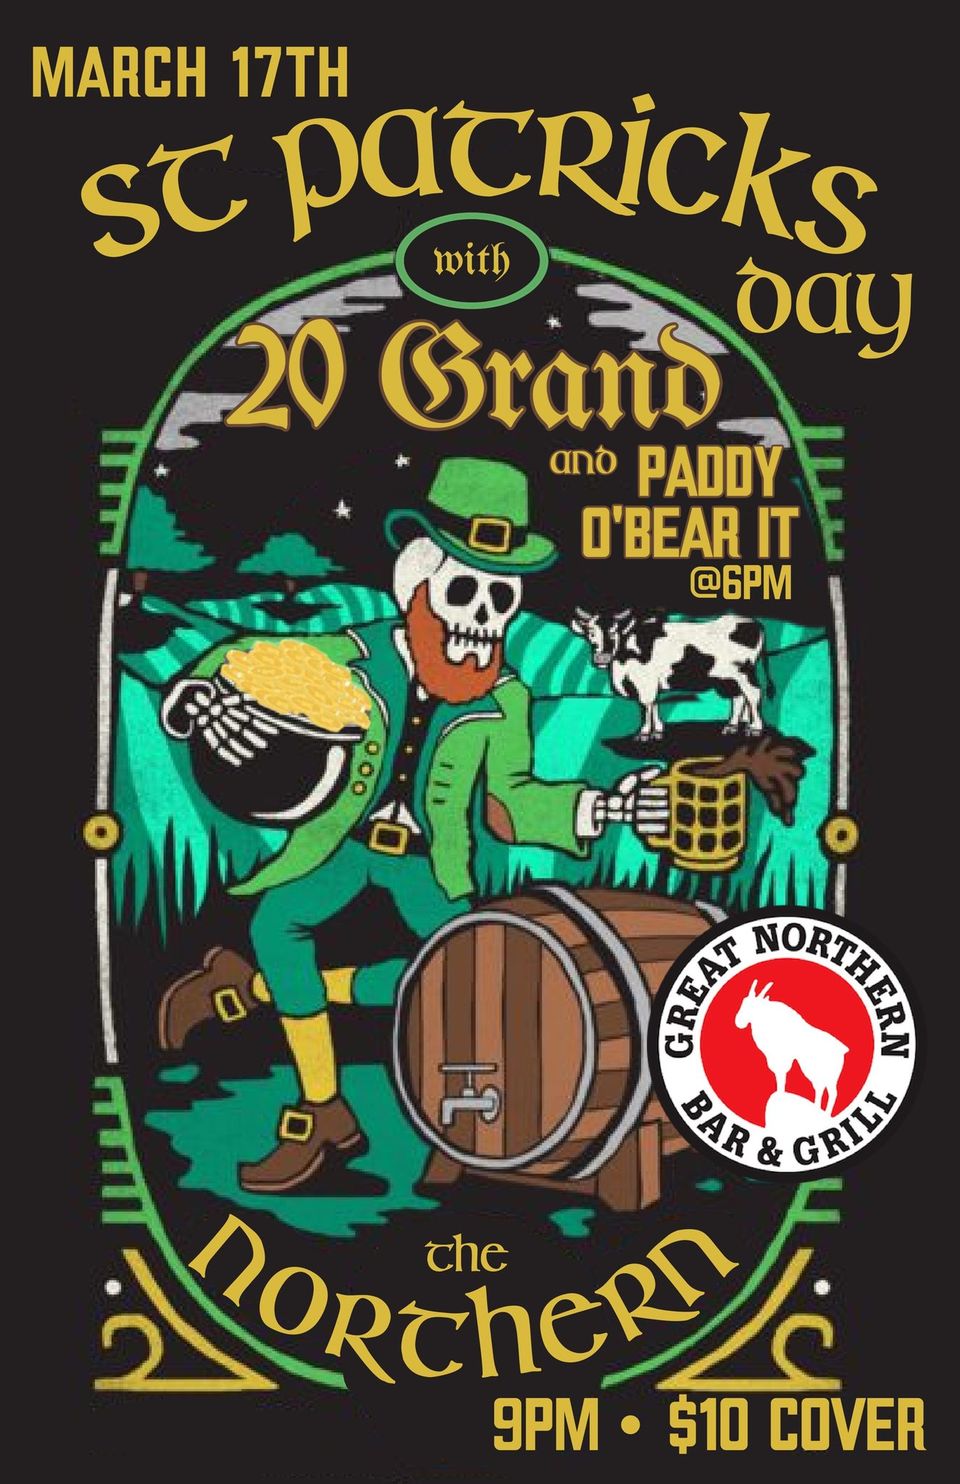 St. Patrick's Day with 20 Grand and Paddy O'Bear It